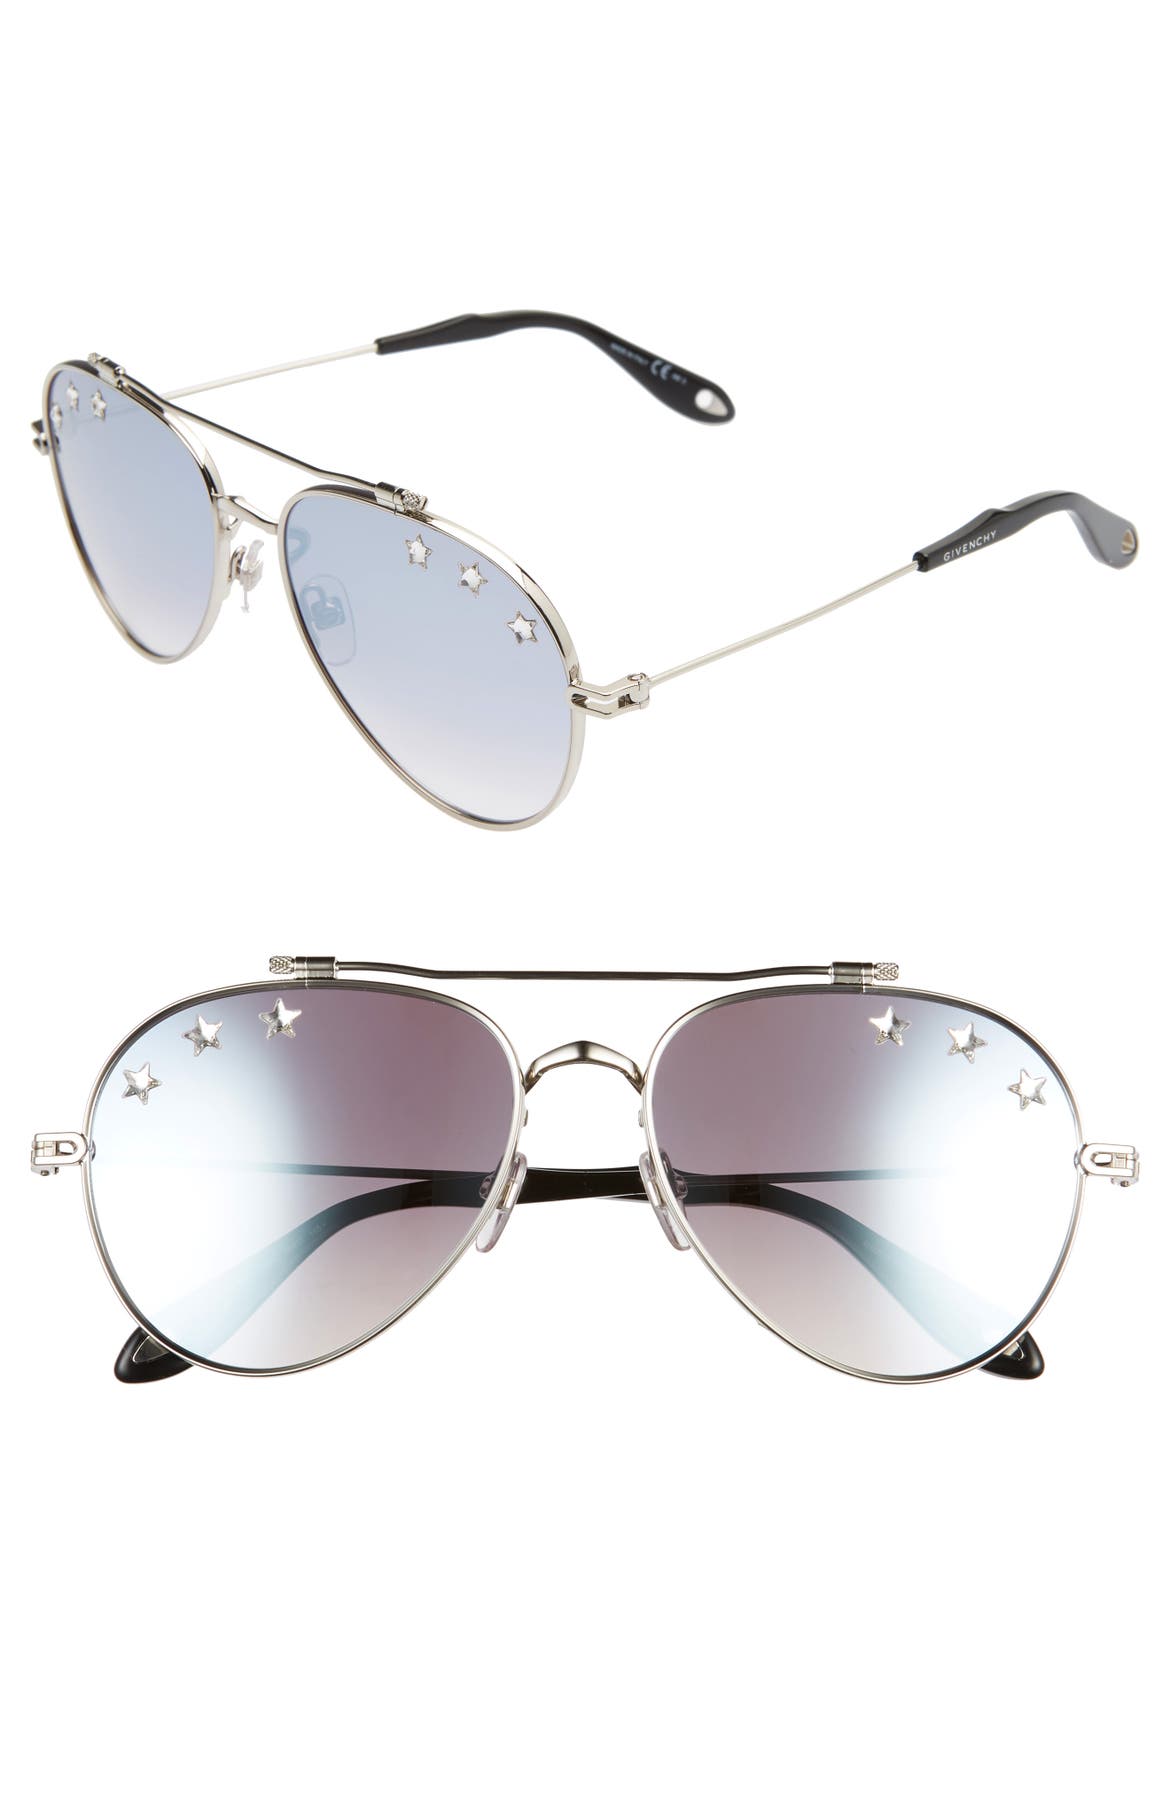 Givenchy 58mm Aviator Sunglasses | Nordstrom